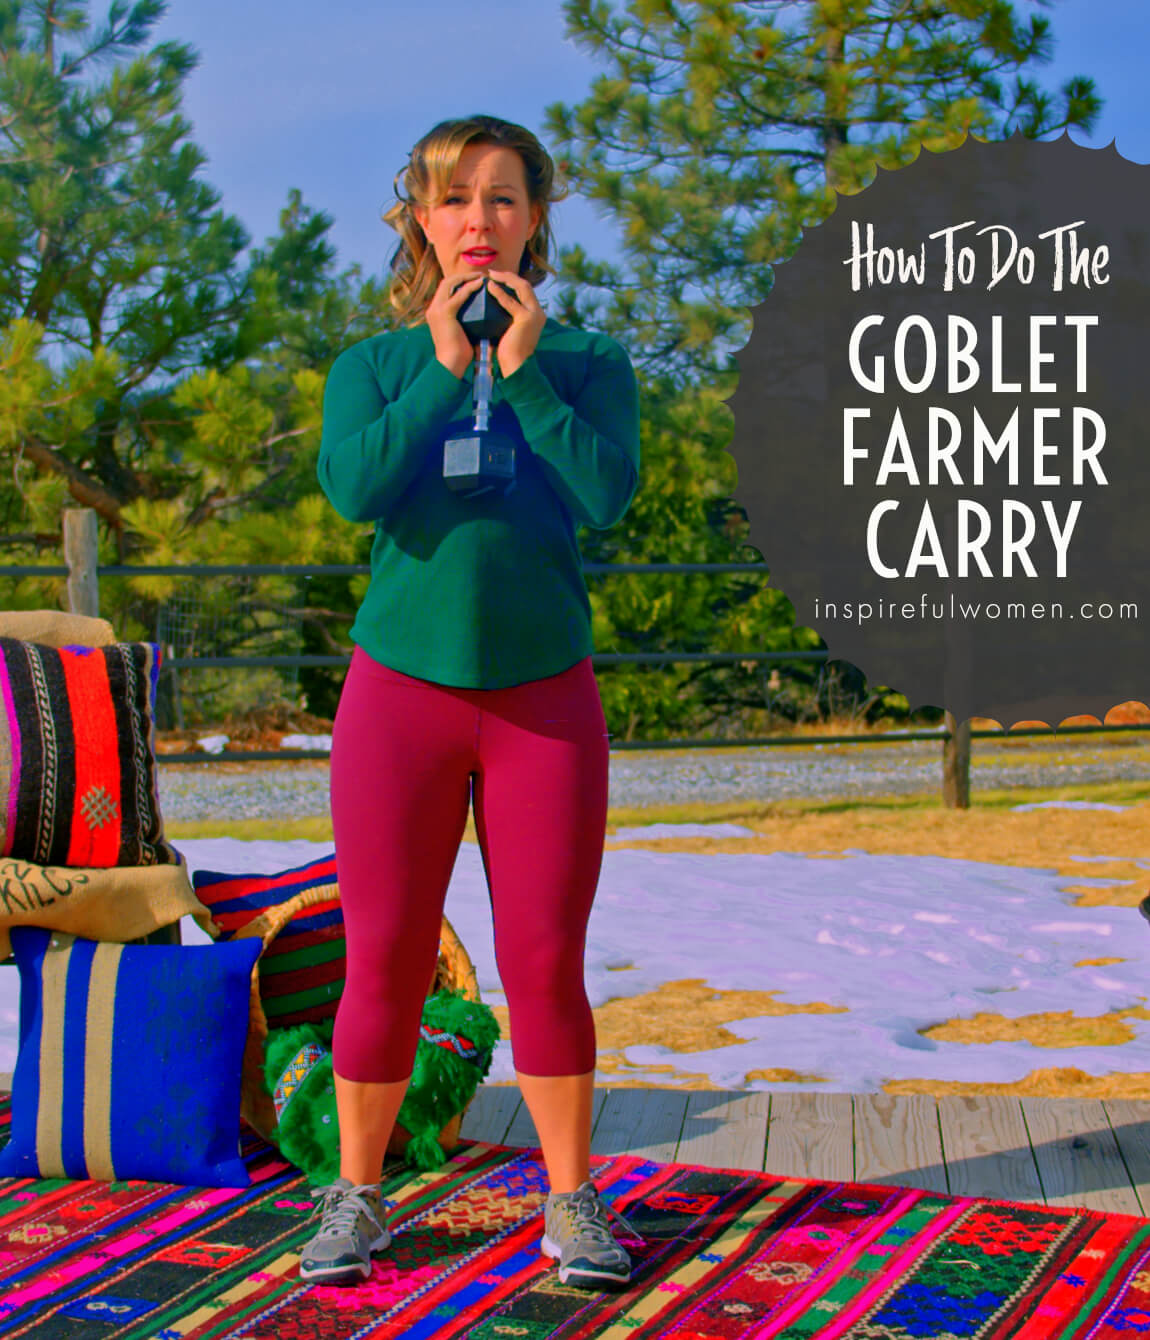 how-to-goblet-farmer-carry-dumbbell-total-body-core-exercise-proper-form